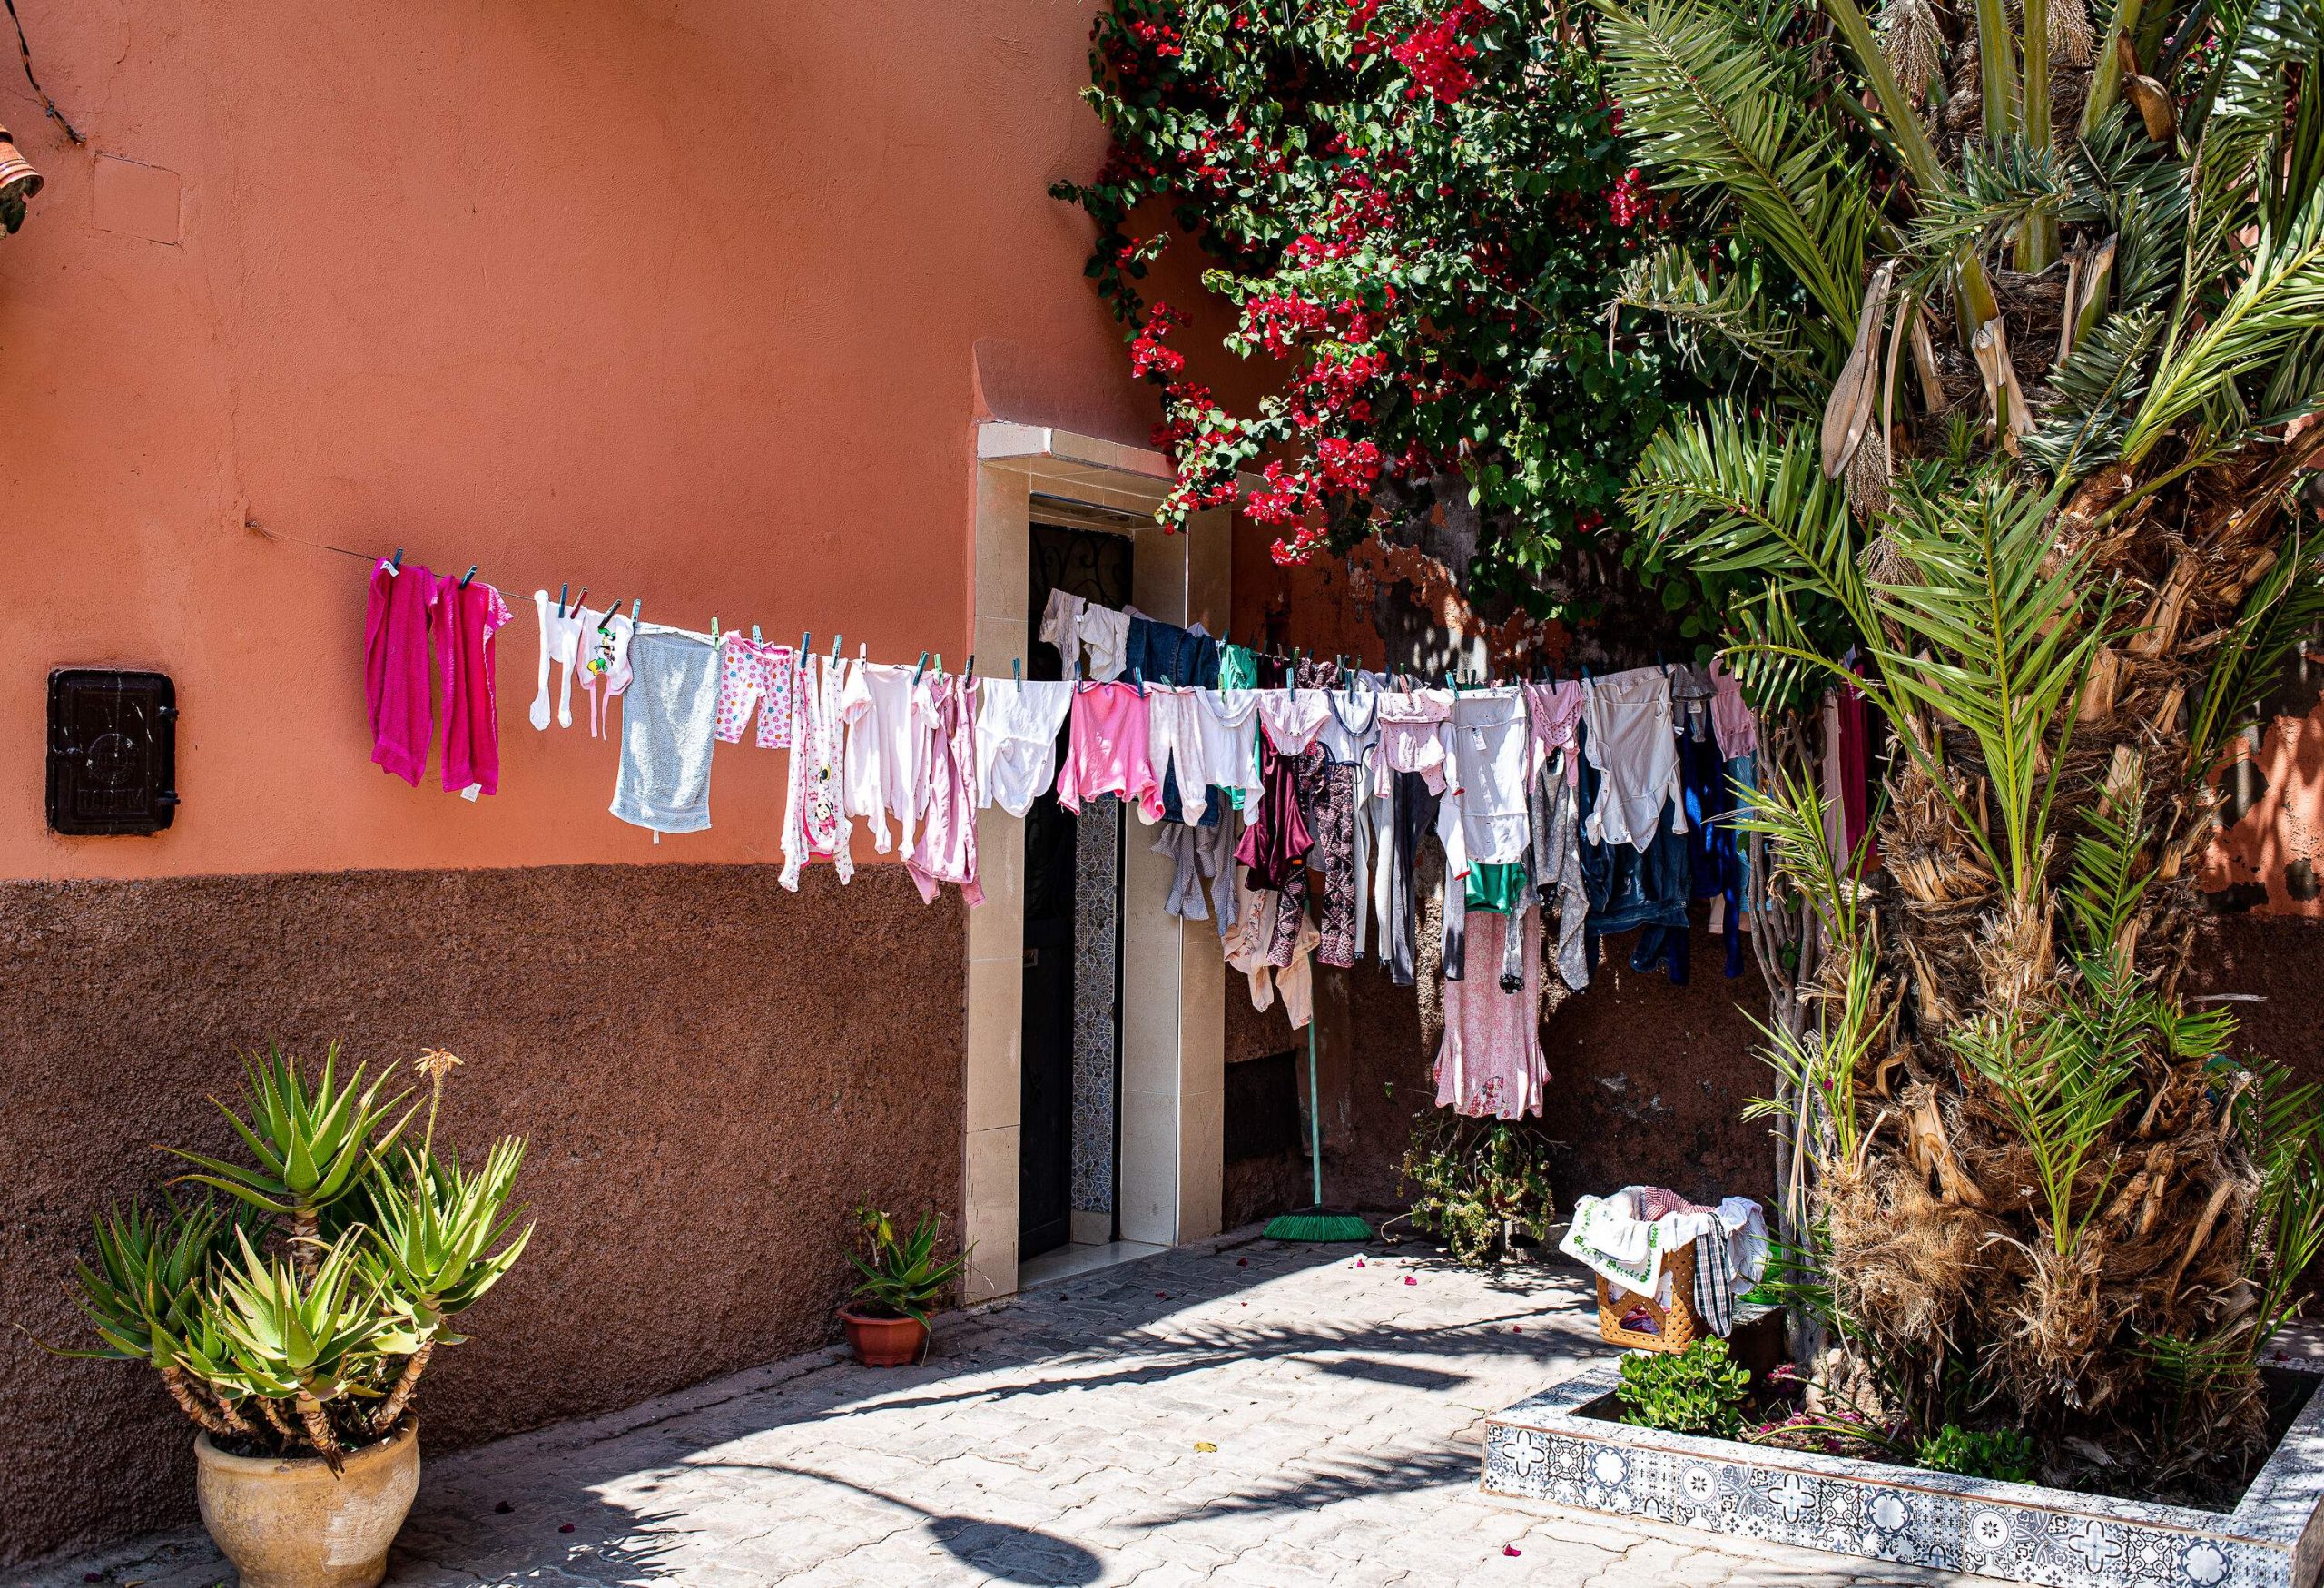 The front of a charming house is adorned with colourful laundry hanging to dry.